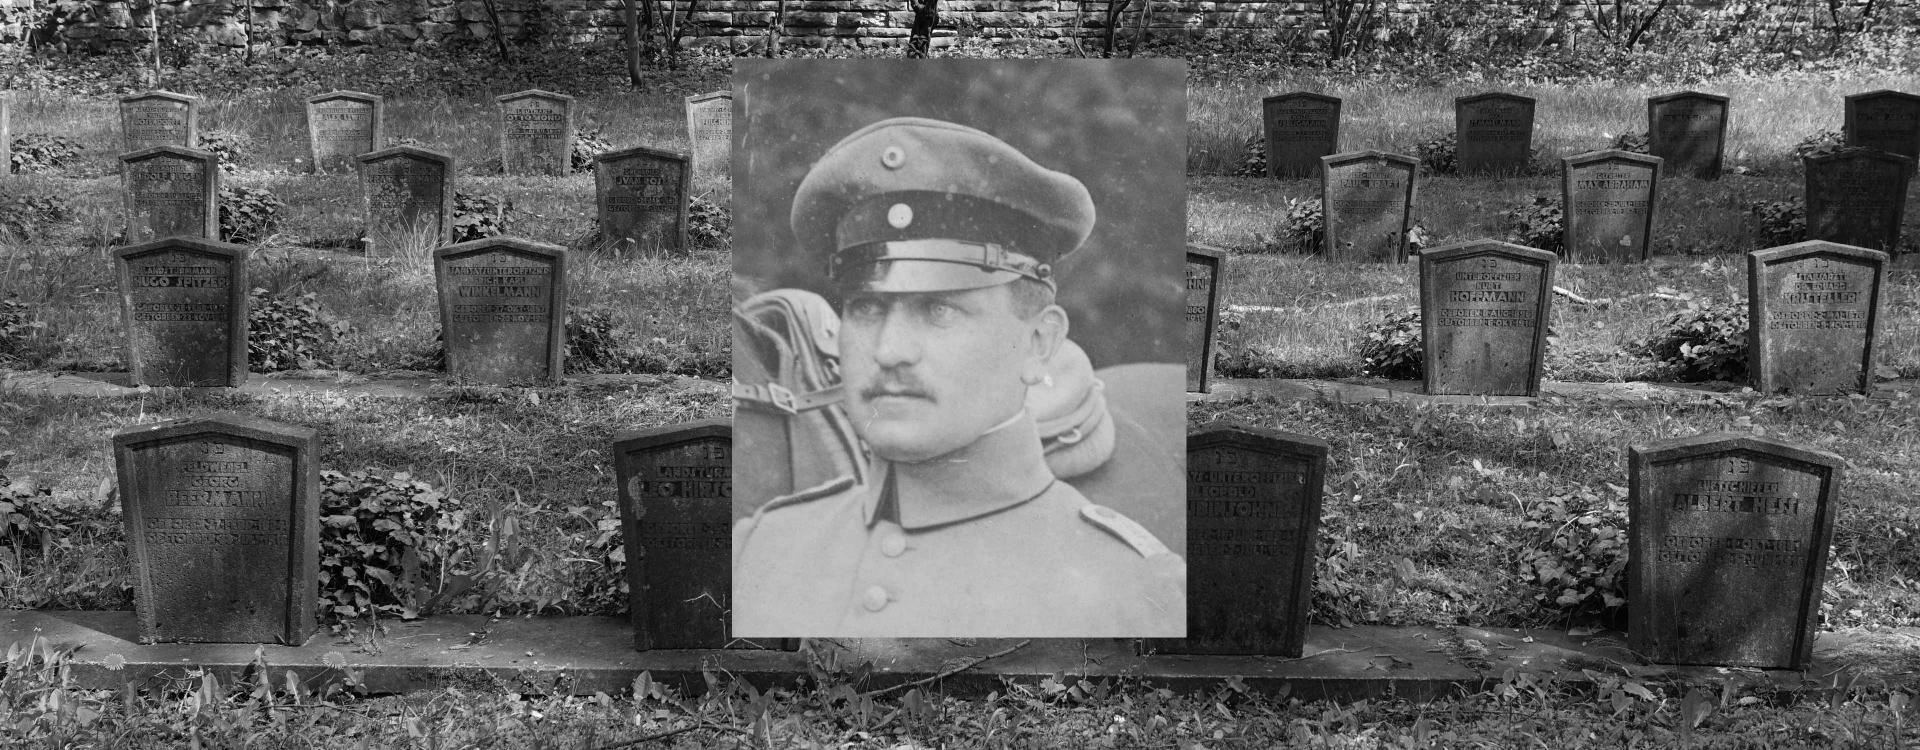 Gravestones in a cemetery, above them the portrait of a man.